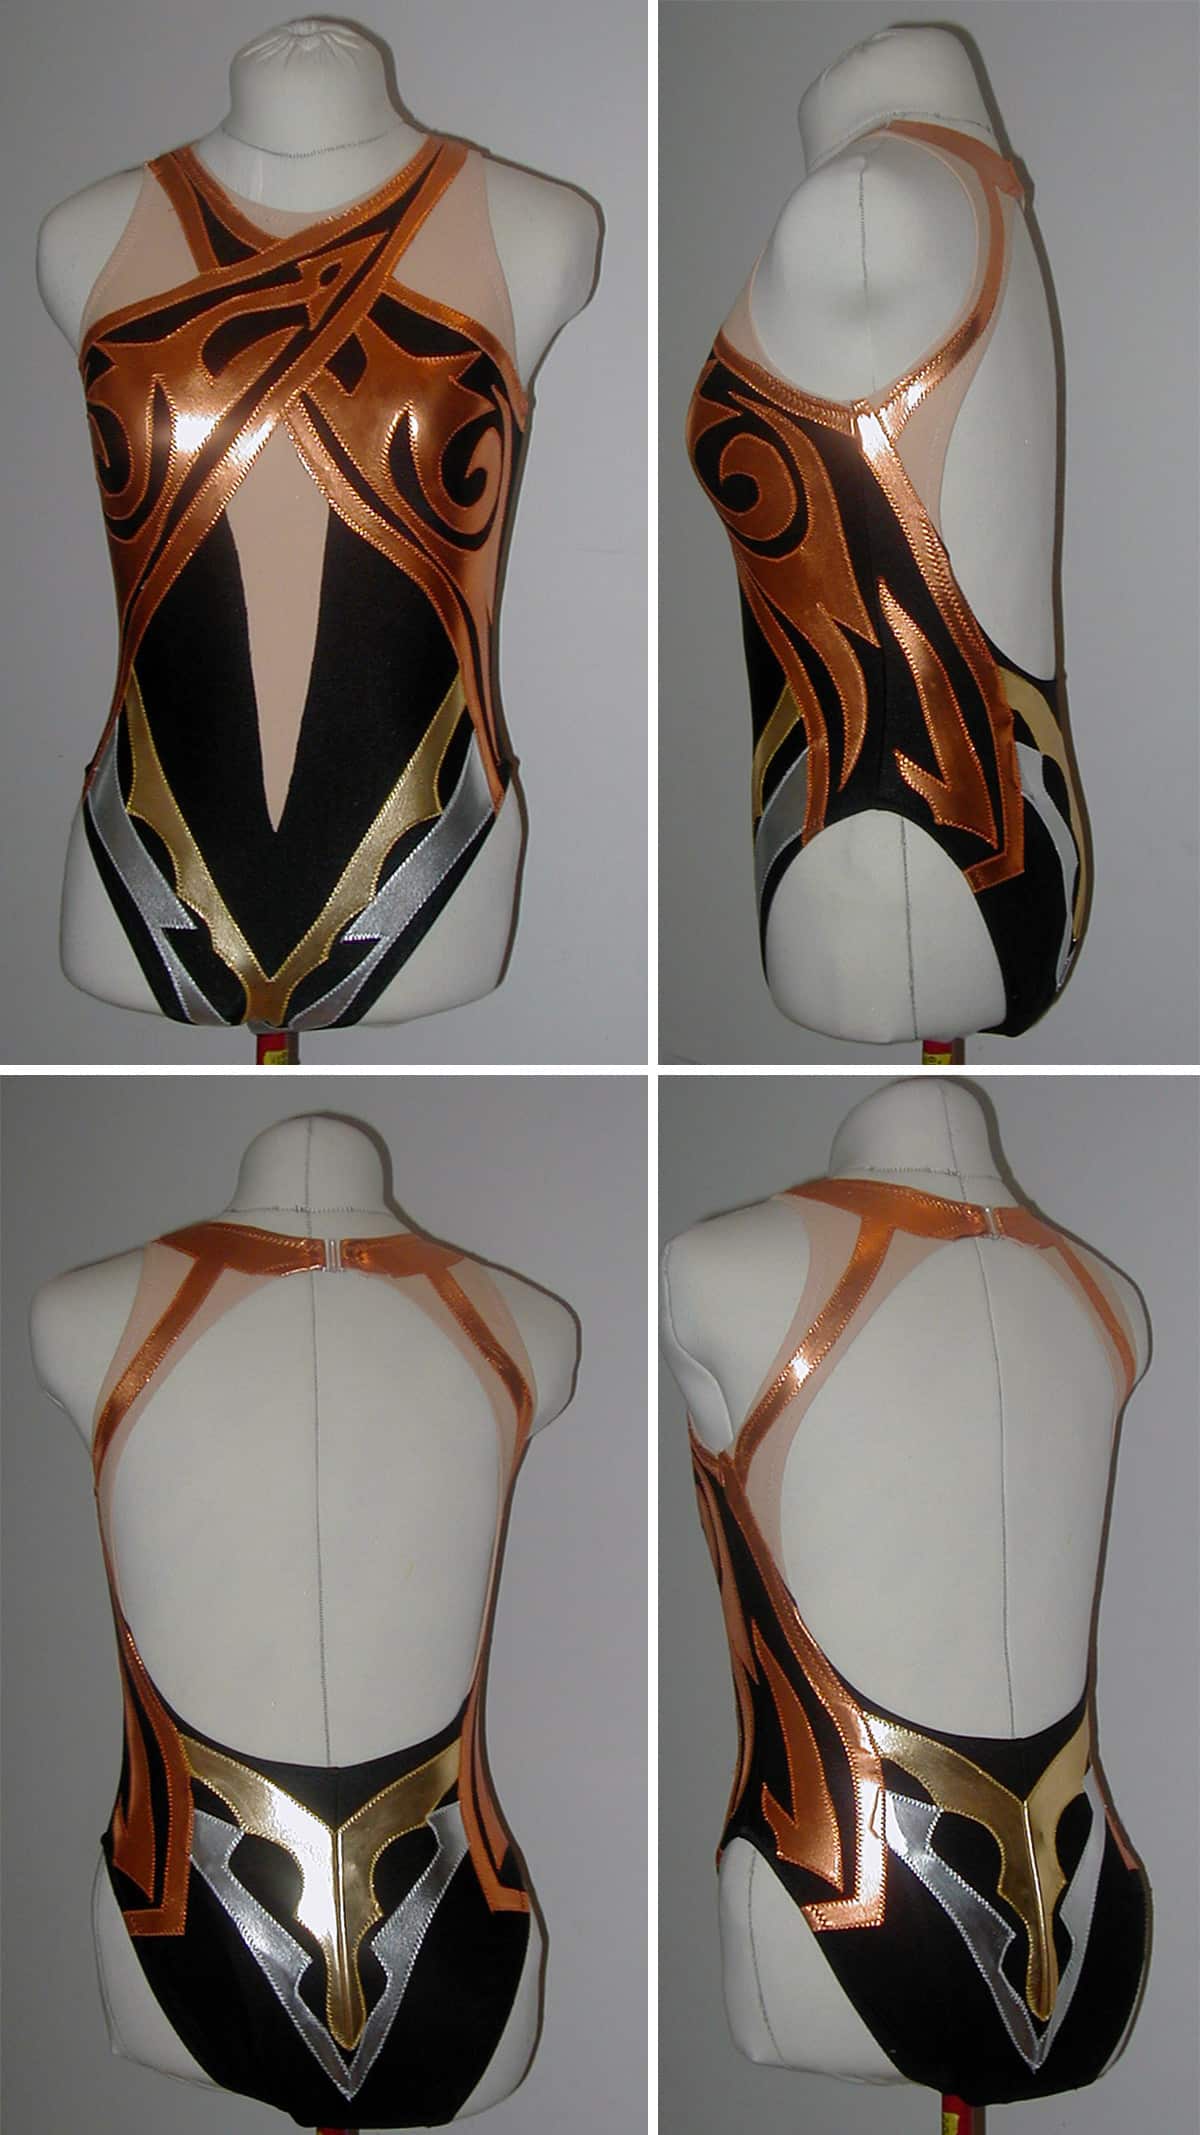 A 4 part image showing various views of a black synchro swimsuit with gold, bronze, and silver designs on it.